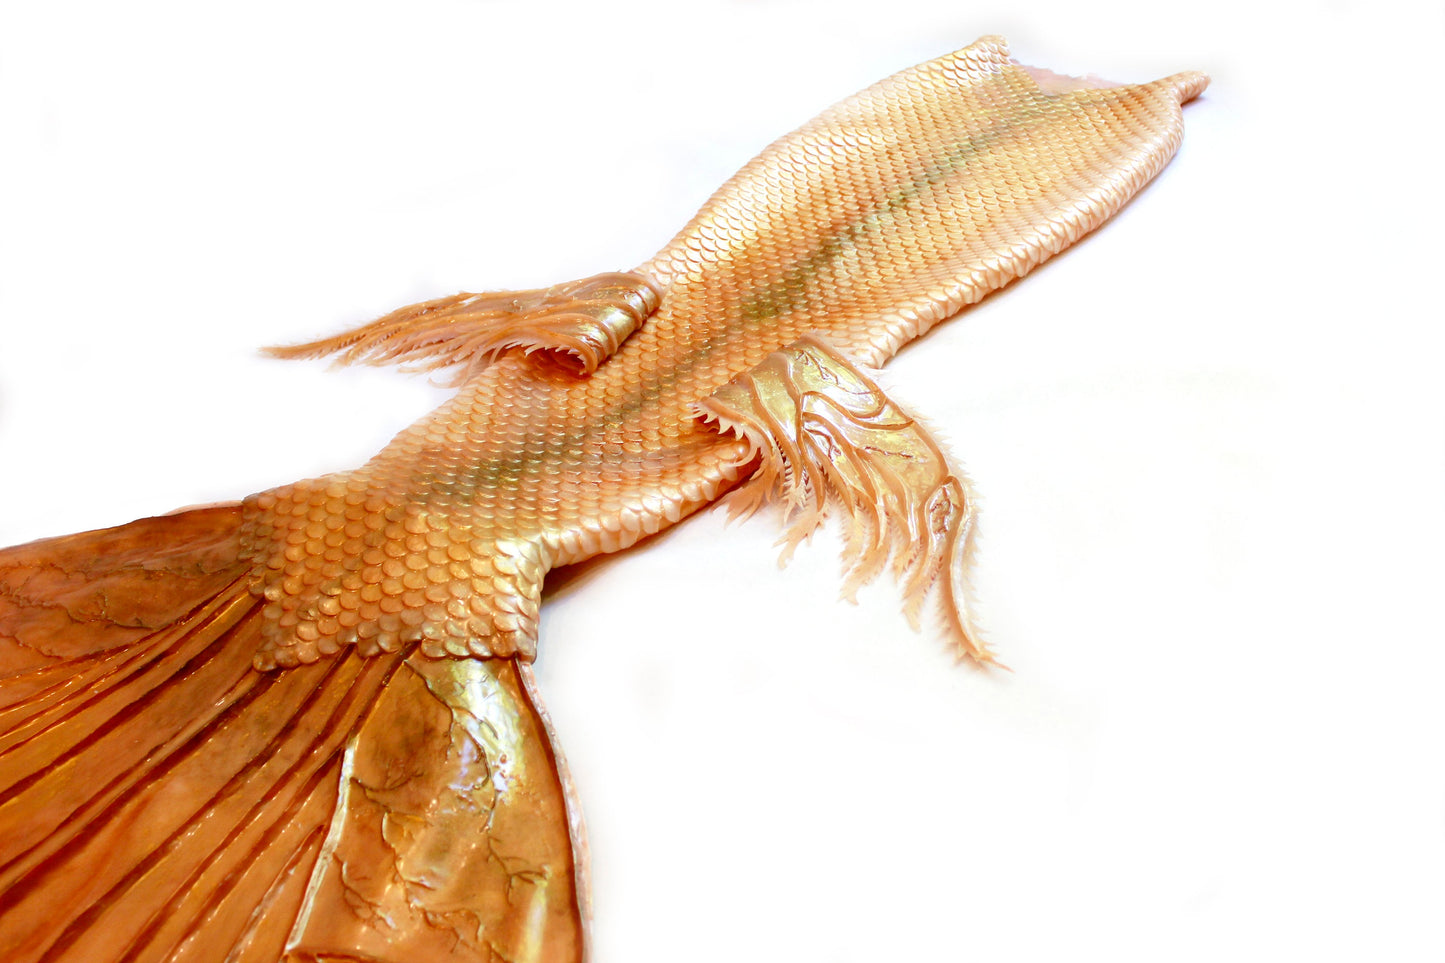 Professionnal mermaid tail, completely in silicone (dragon skin), accessible price, with monofin inside.